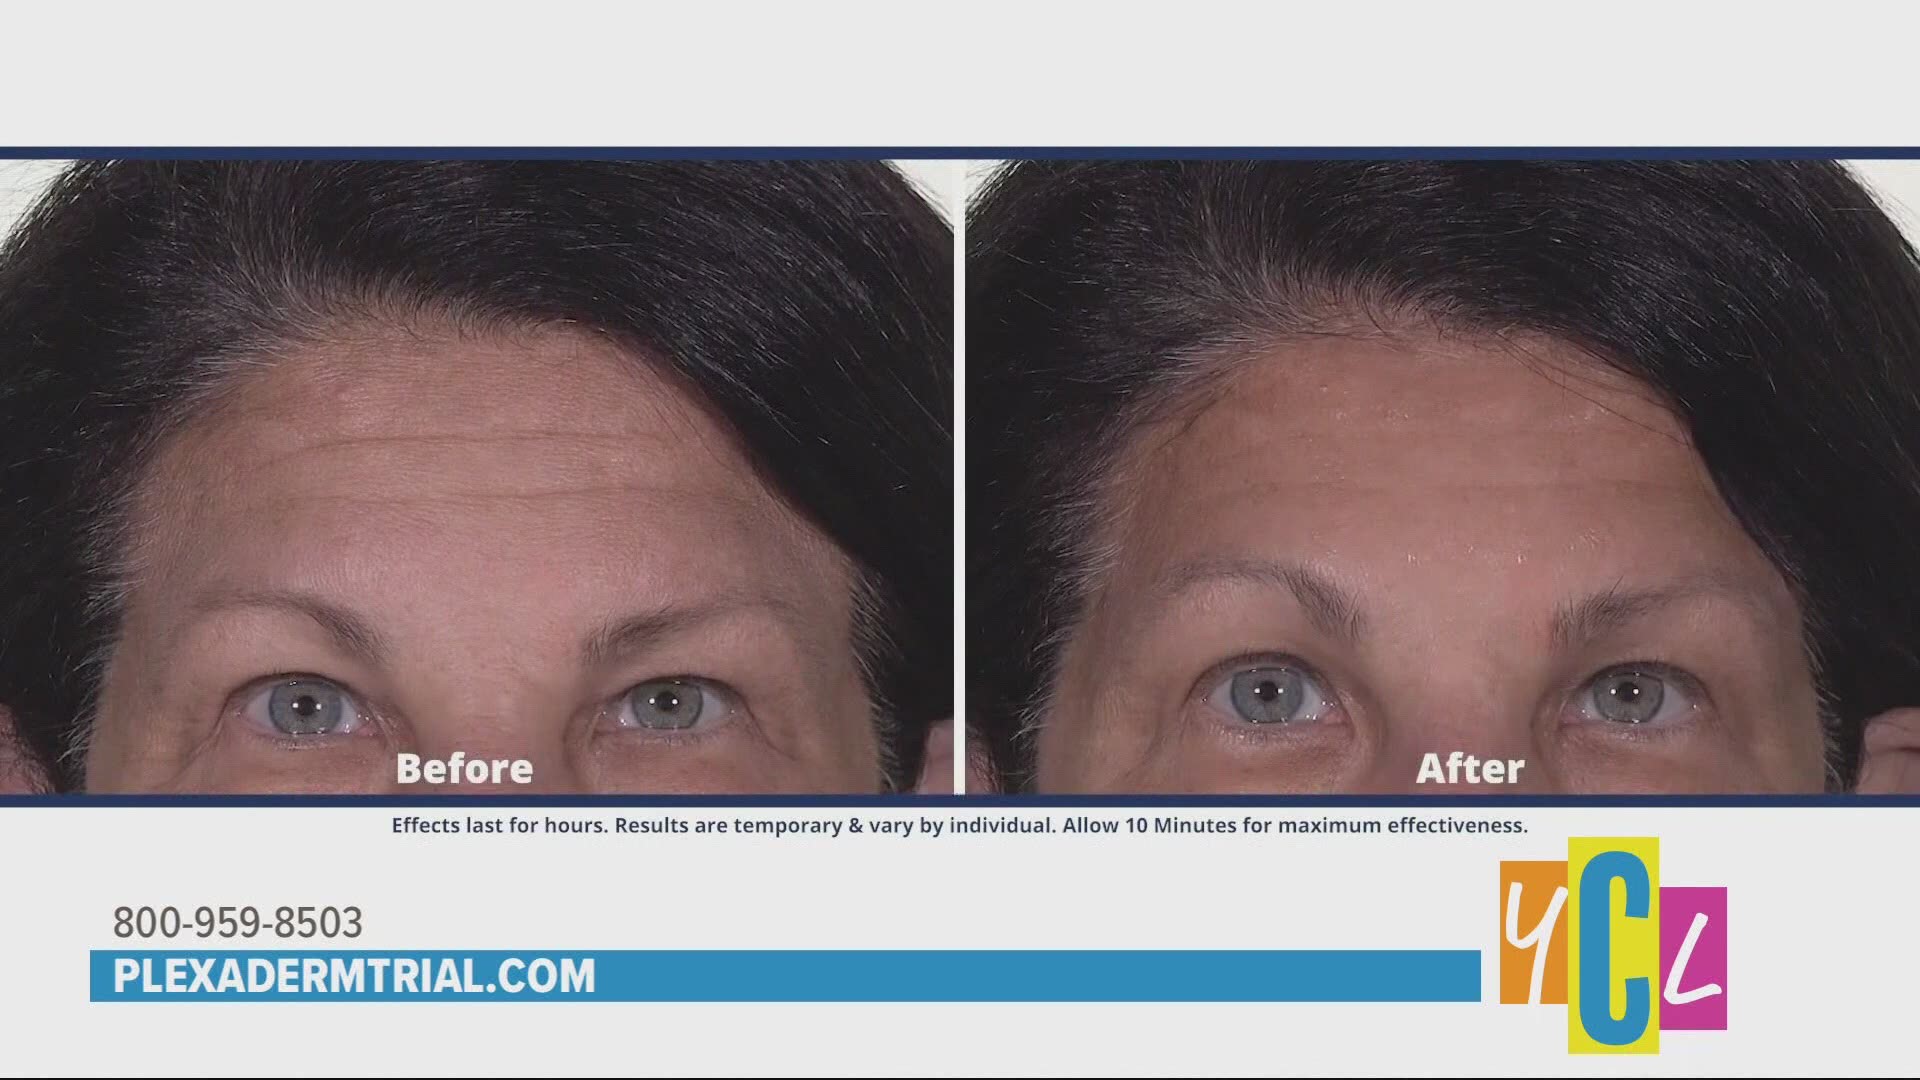 Plexaderm reduces under eye bags, dark circles, and wrinkles from view. This segment was paid for by True Earth Health Solutions.